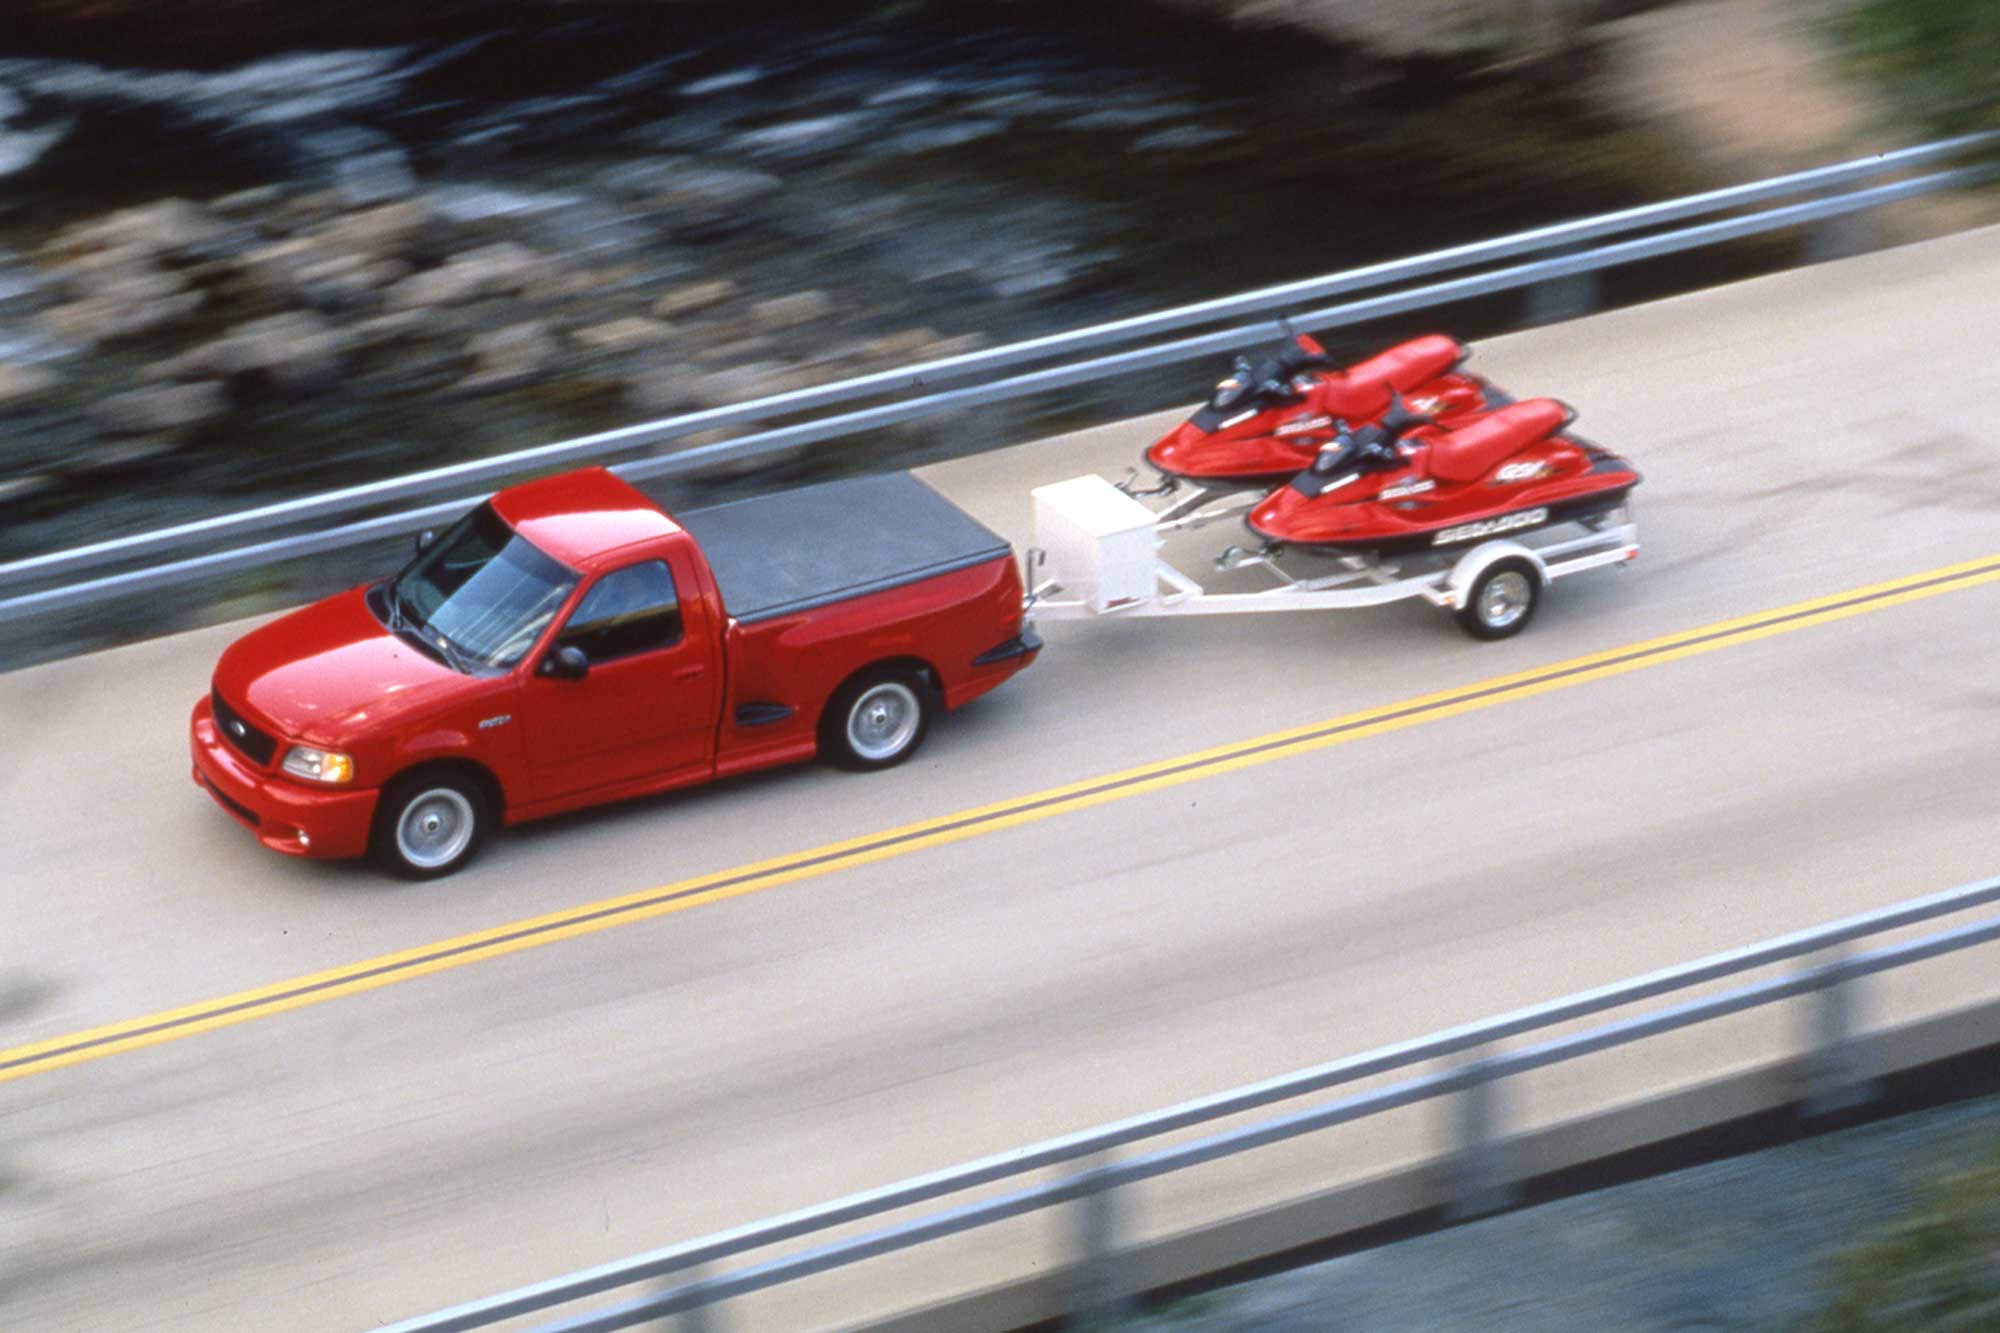 Red 1999 Ford F-150 Lightning towing a pair of personal watercraft on a two-lane bridge.